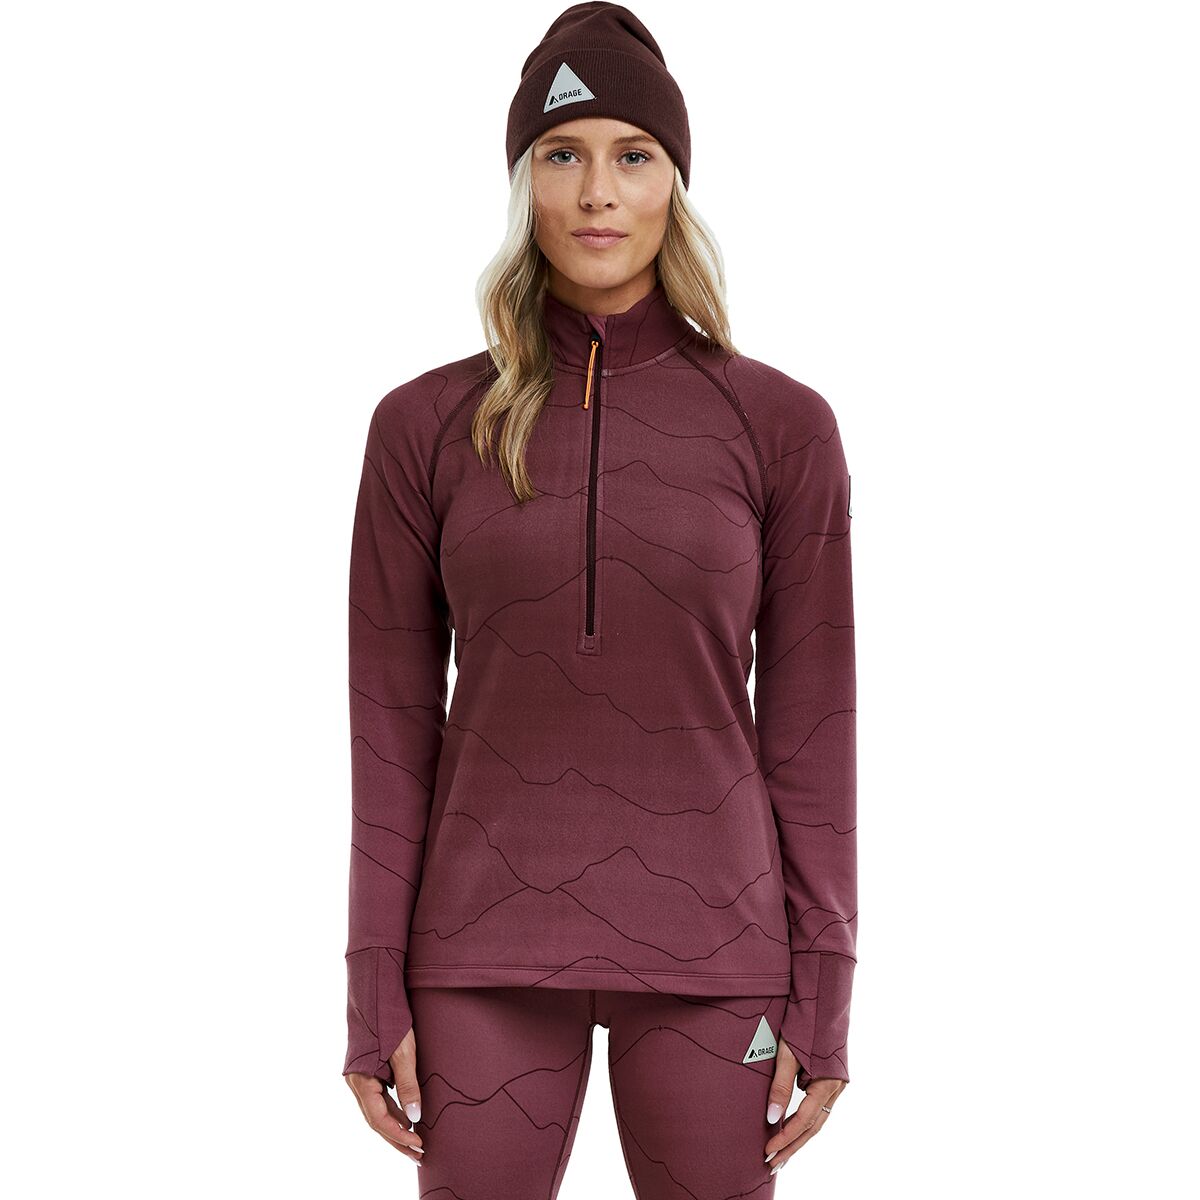 Orage Harebelly Base Layer Top - Women's